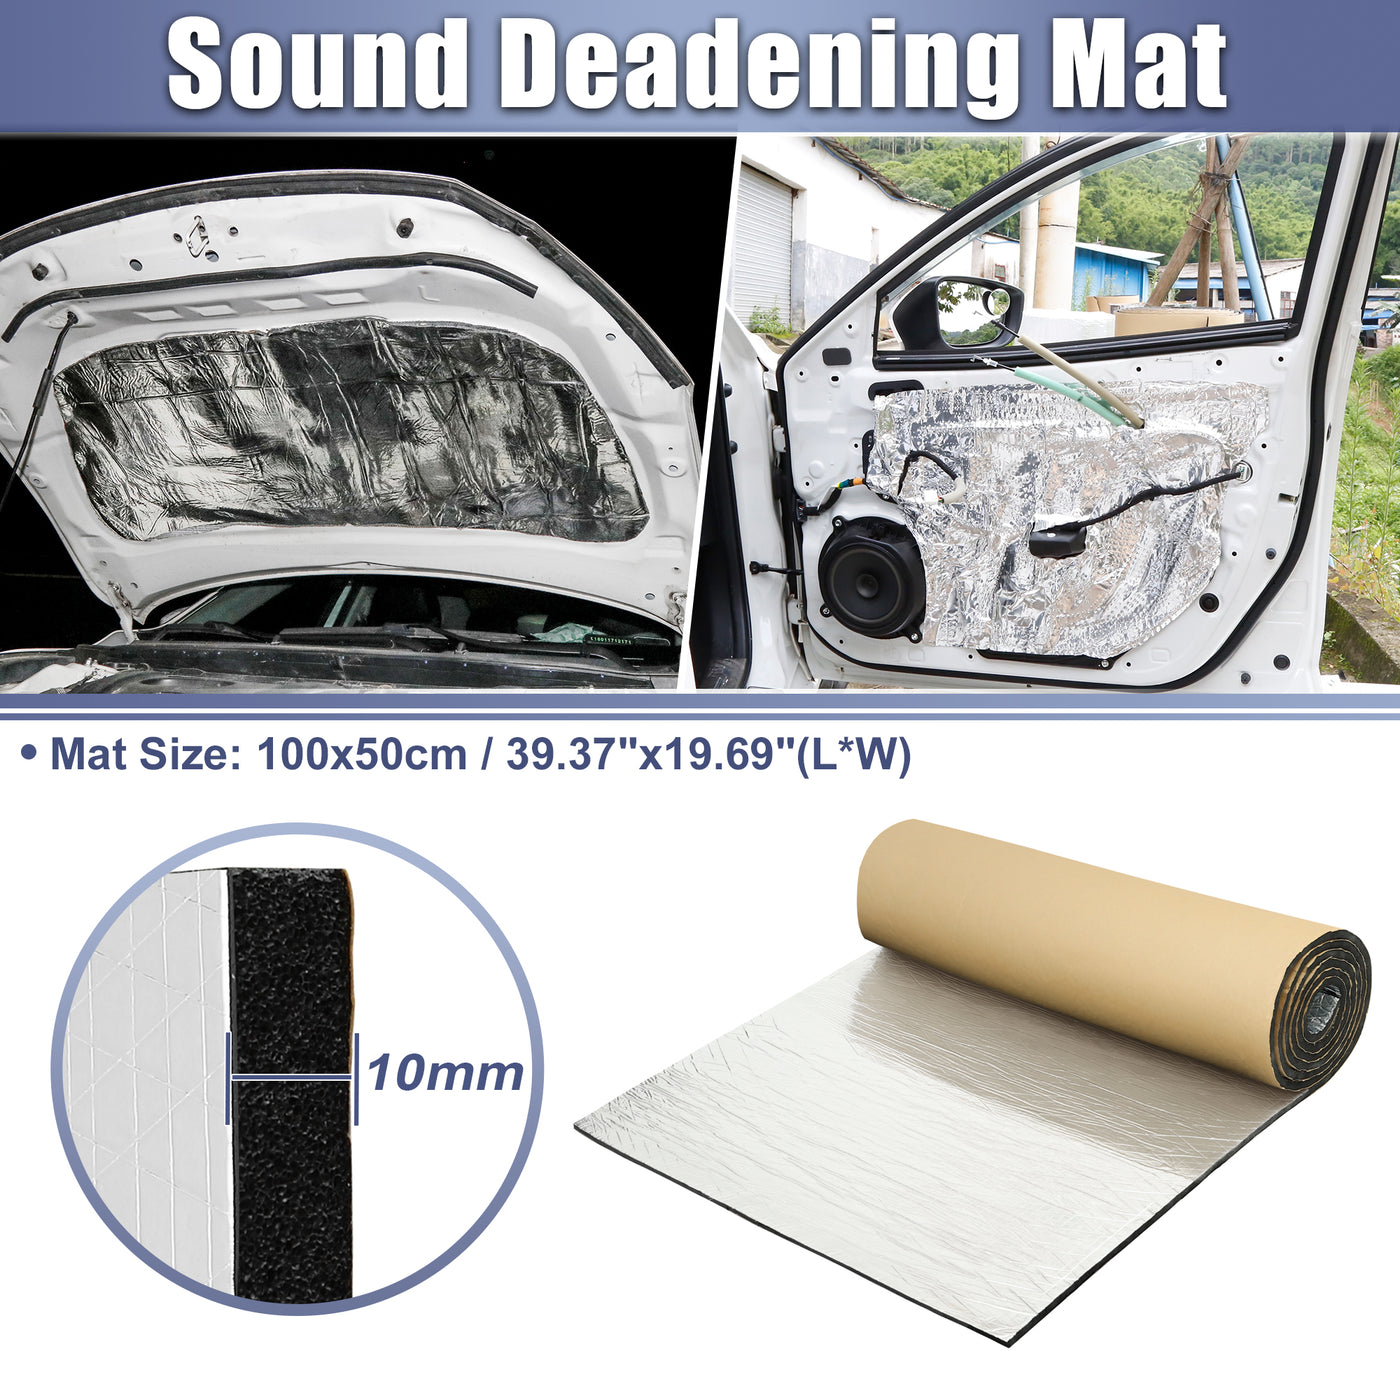 X AUTOHAUX 394mil 10mm 5.38sqft Car Sound Deadening Mat Aluminum Foil Closed Cell Foam Heat Shield Material Damping Self Adhesive Universal for Hood Fender and Boat Engine Cover 39.37"x19.69"